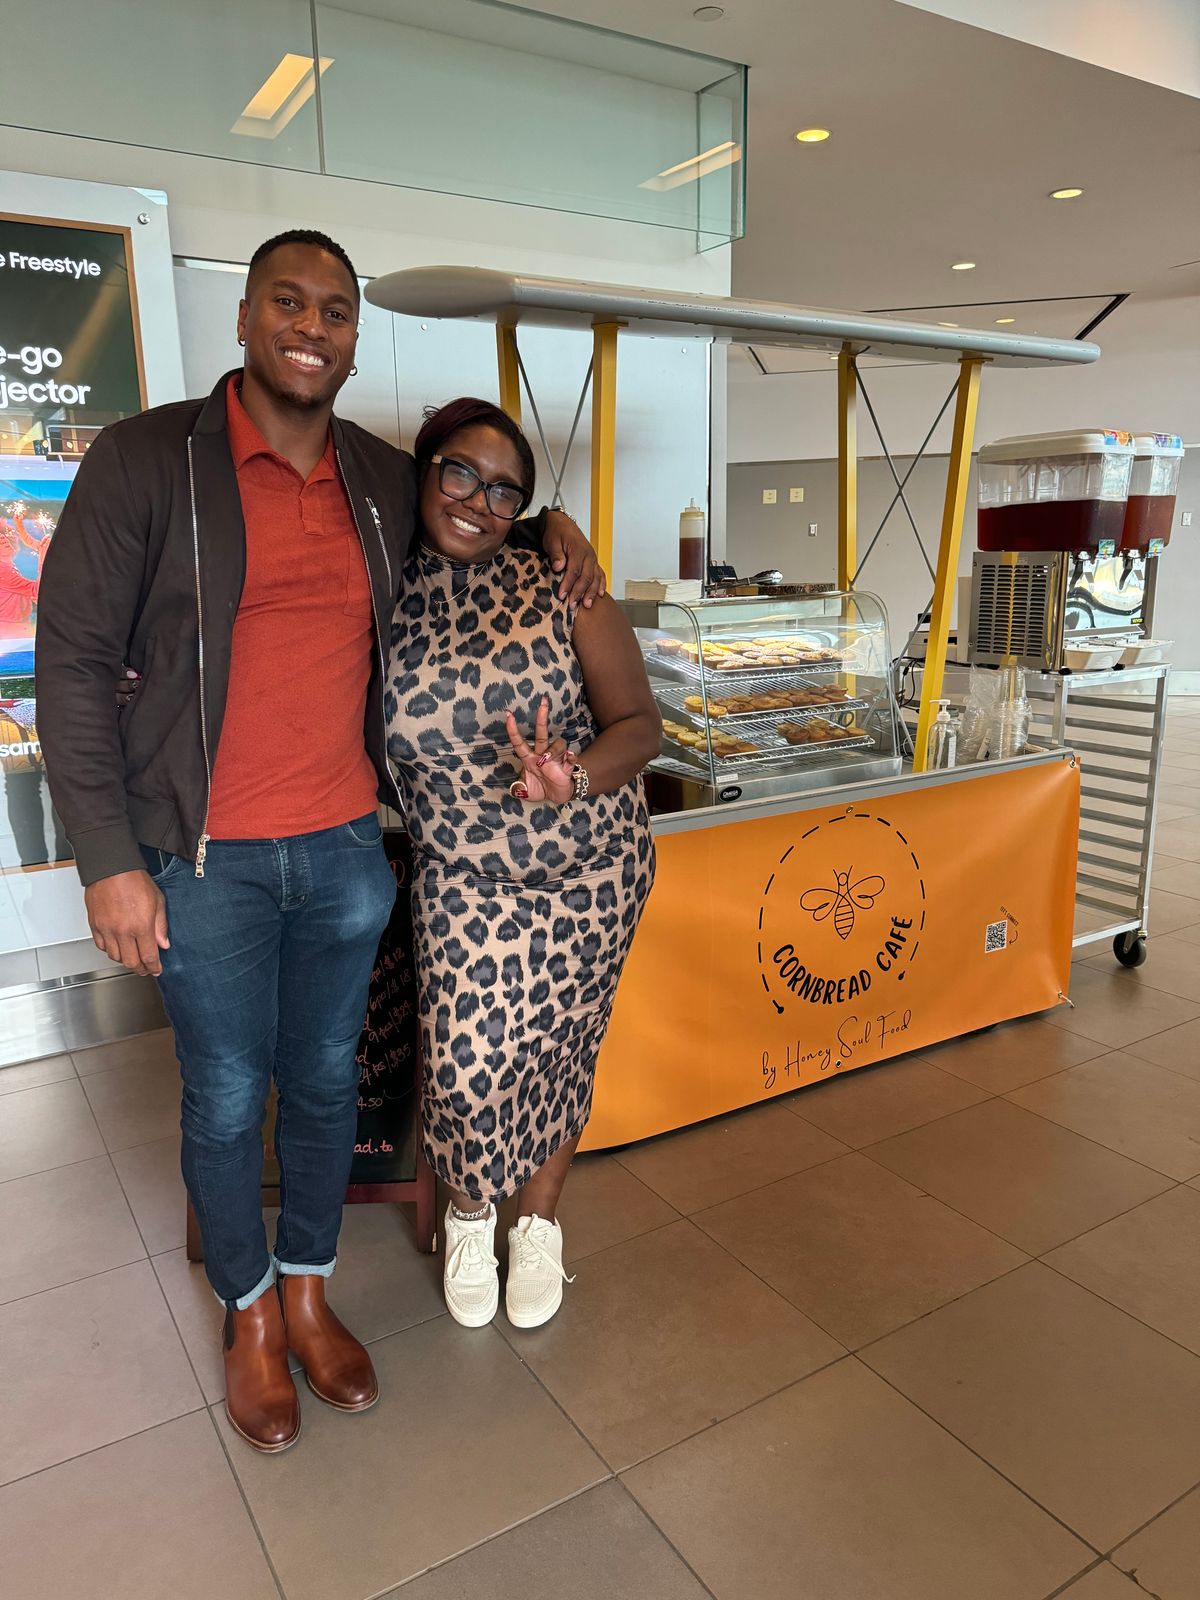 Honey Soul Food founders open Cornbread Cafe at Toronto's Billy Bishop Airport